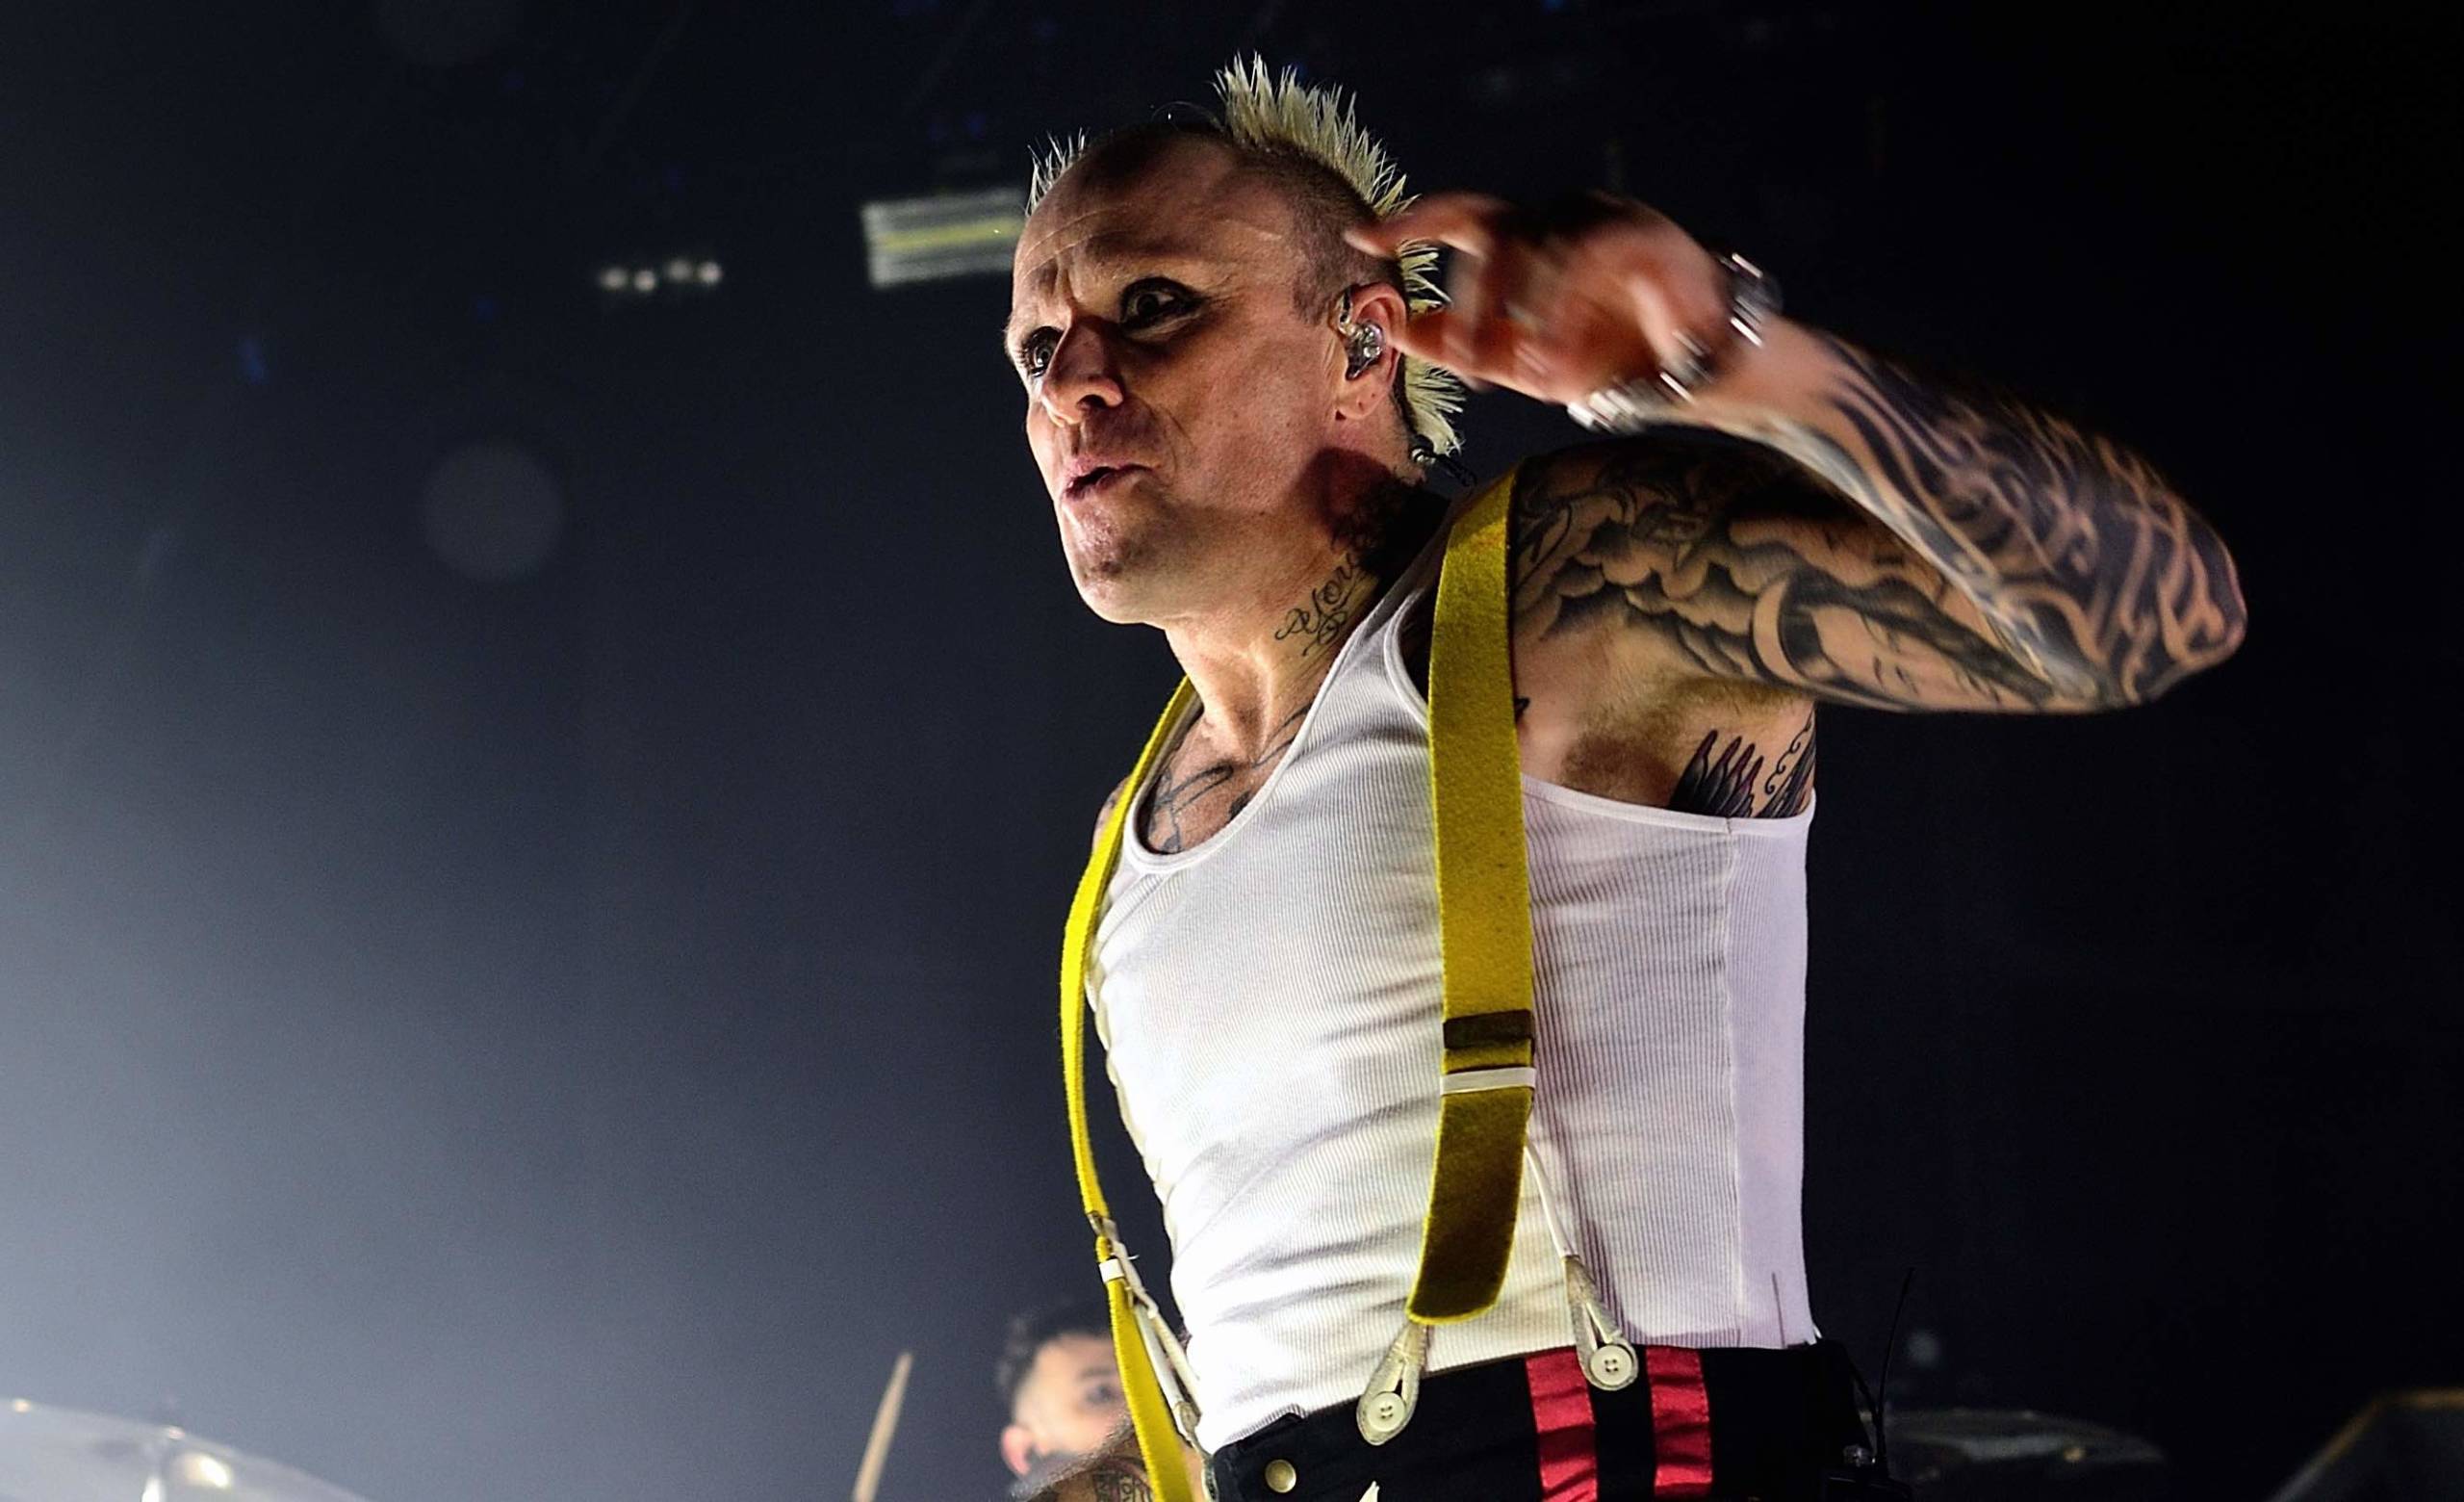 The-Prodigy-Frontmann Keith Flint